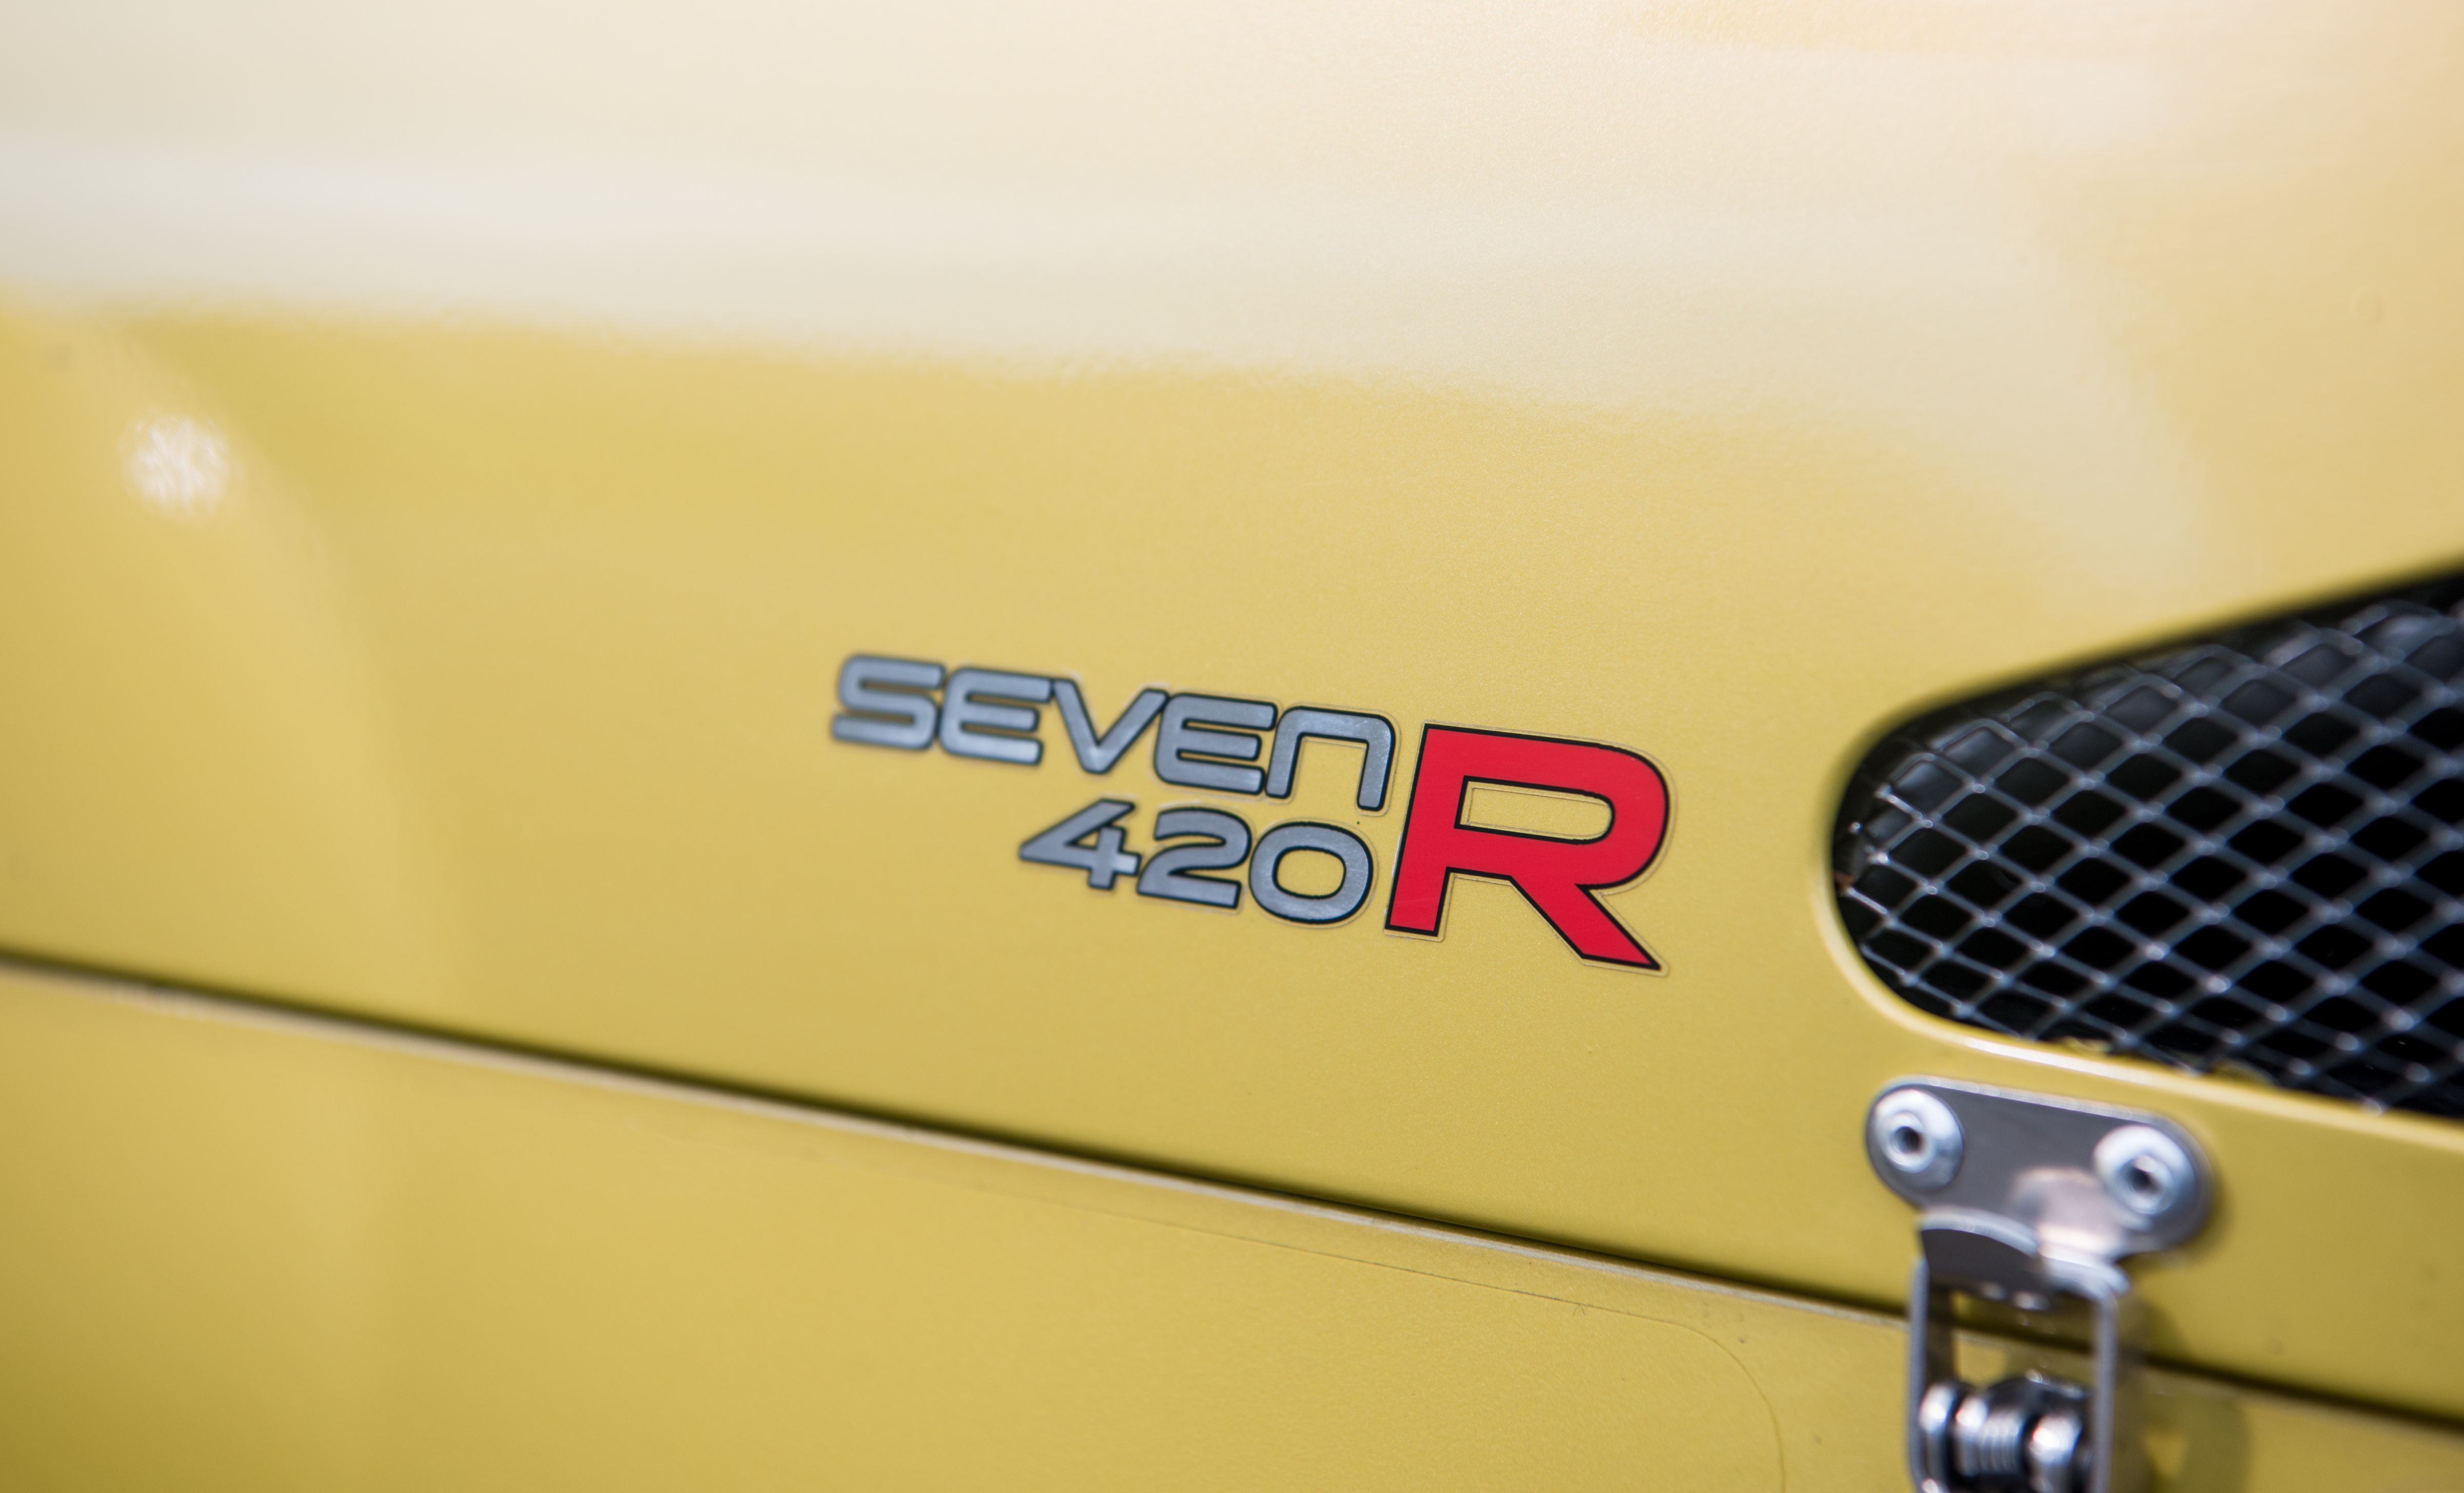 The 420R is the entry point into 2.0-litre-powered Seven models